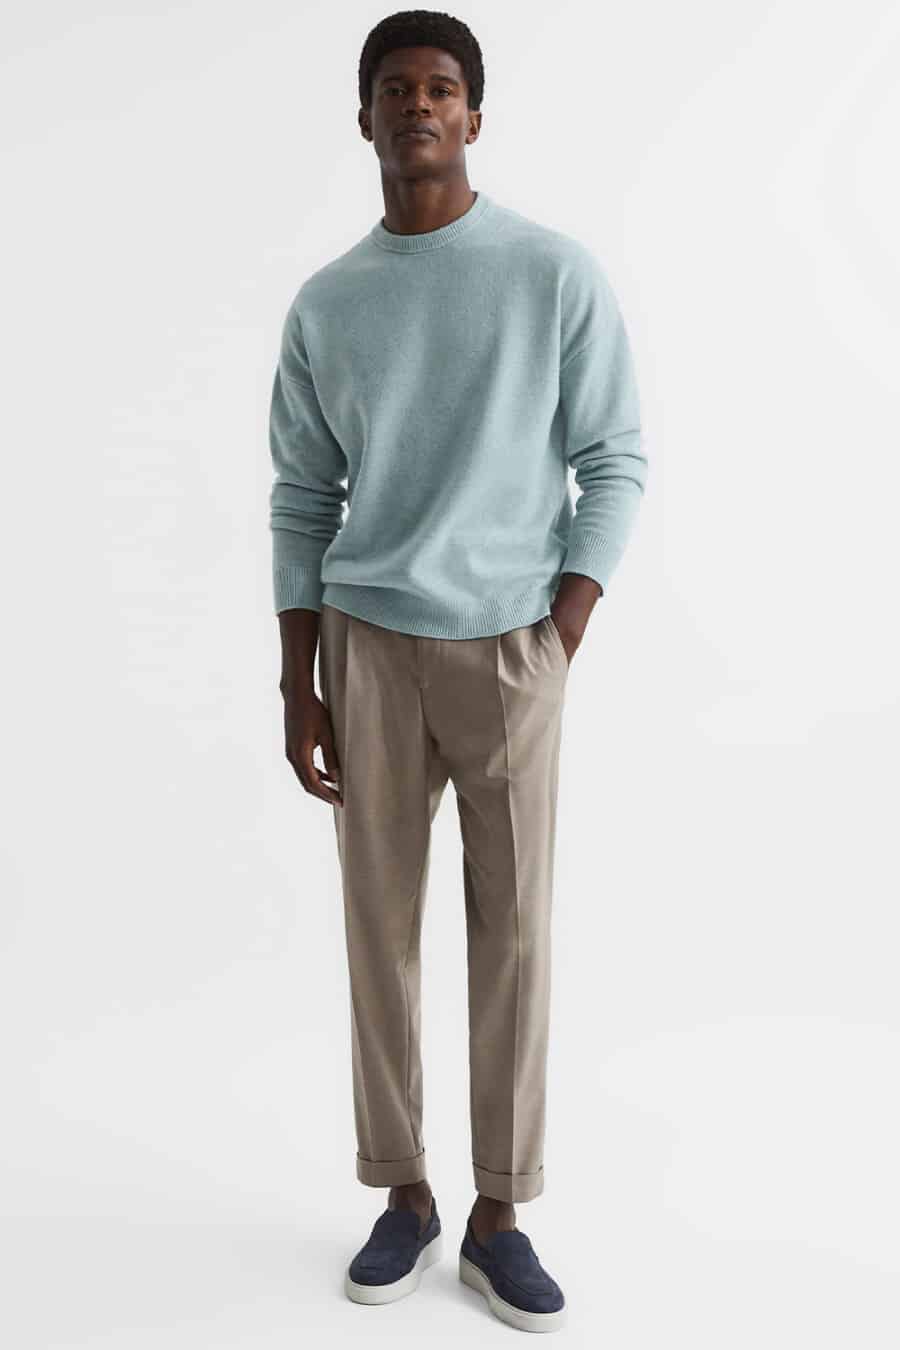 Men's light brown pants, light blue sweater and navy suede loafers outfit